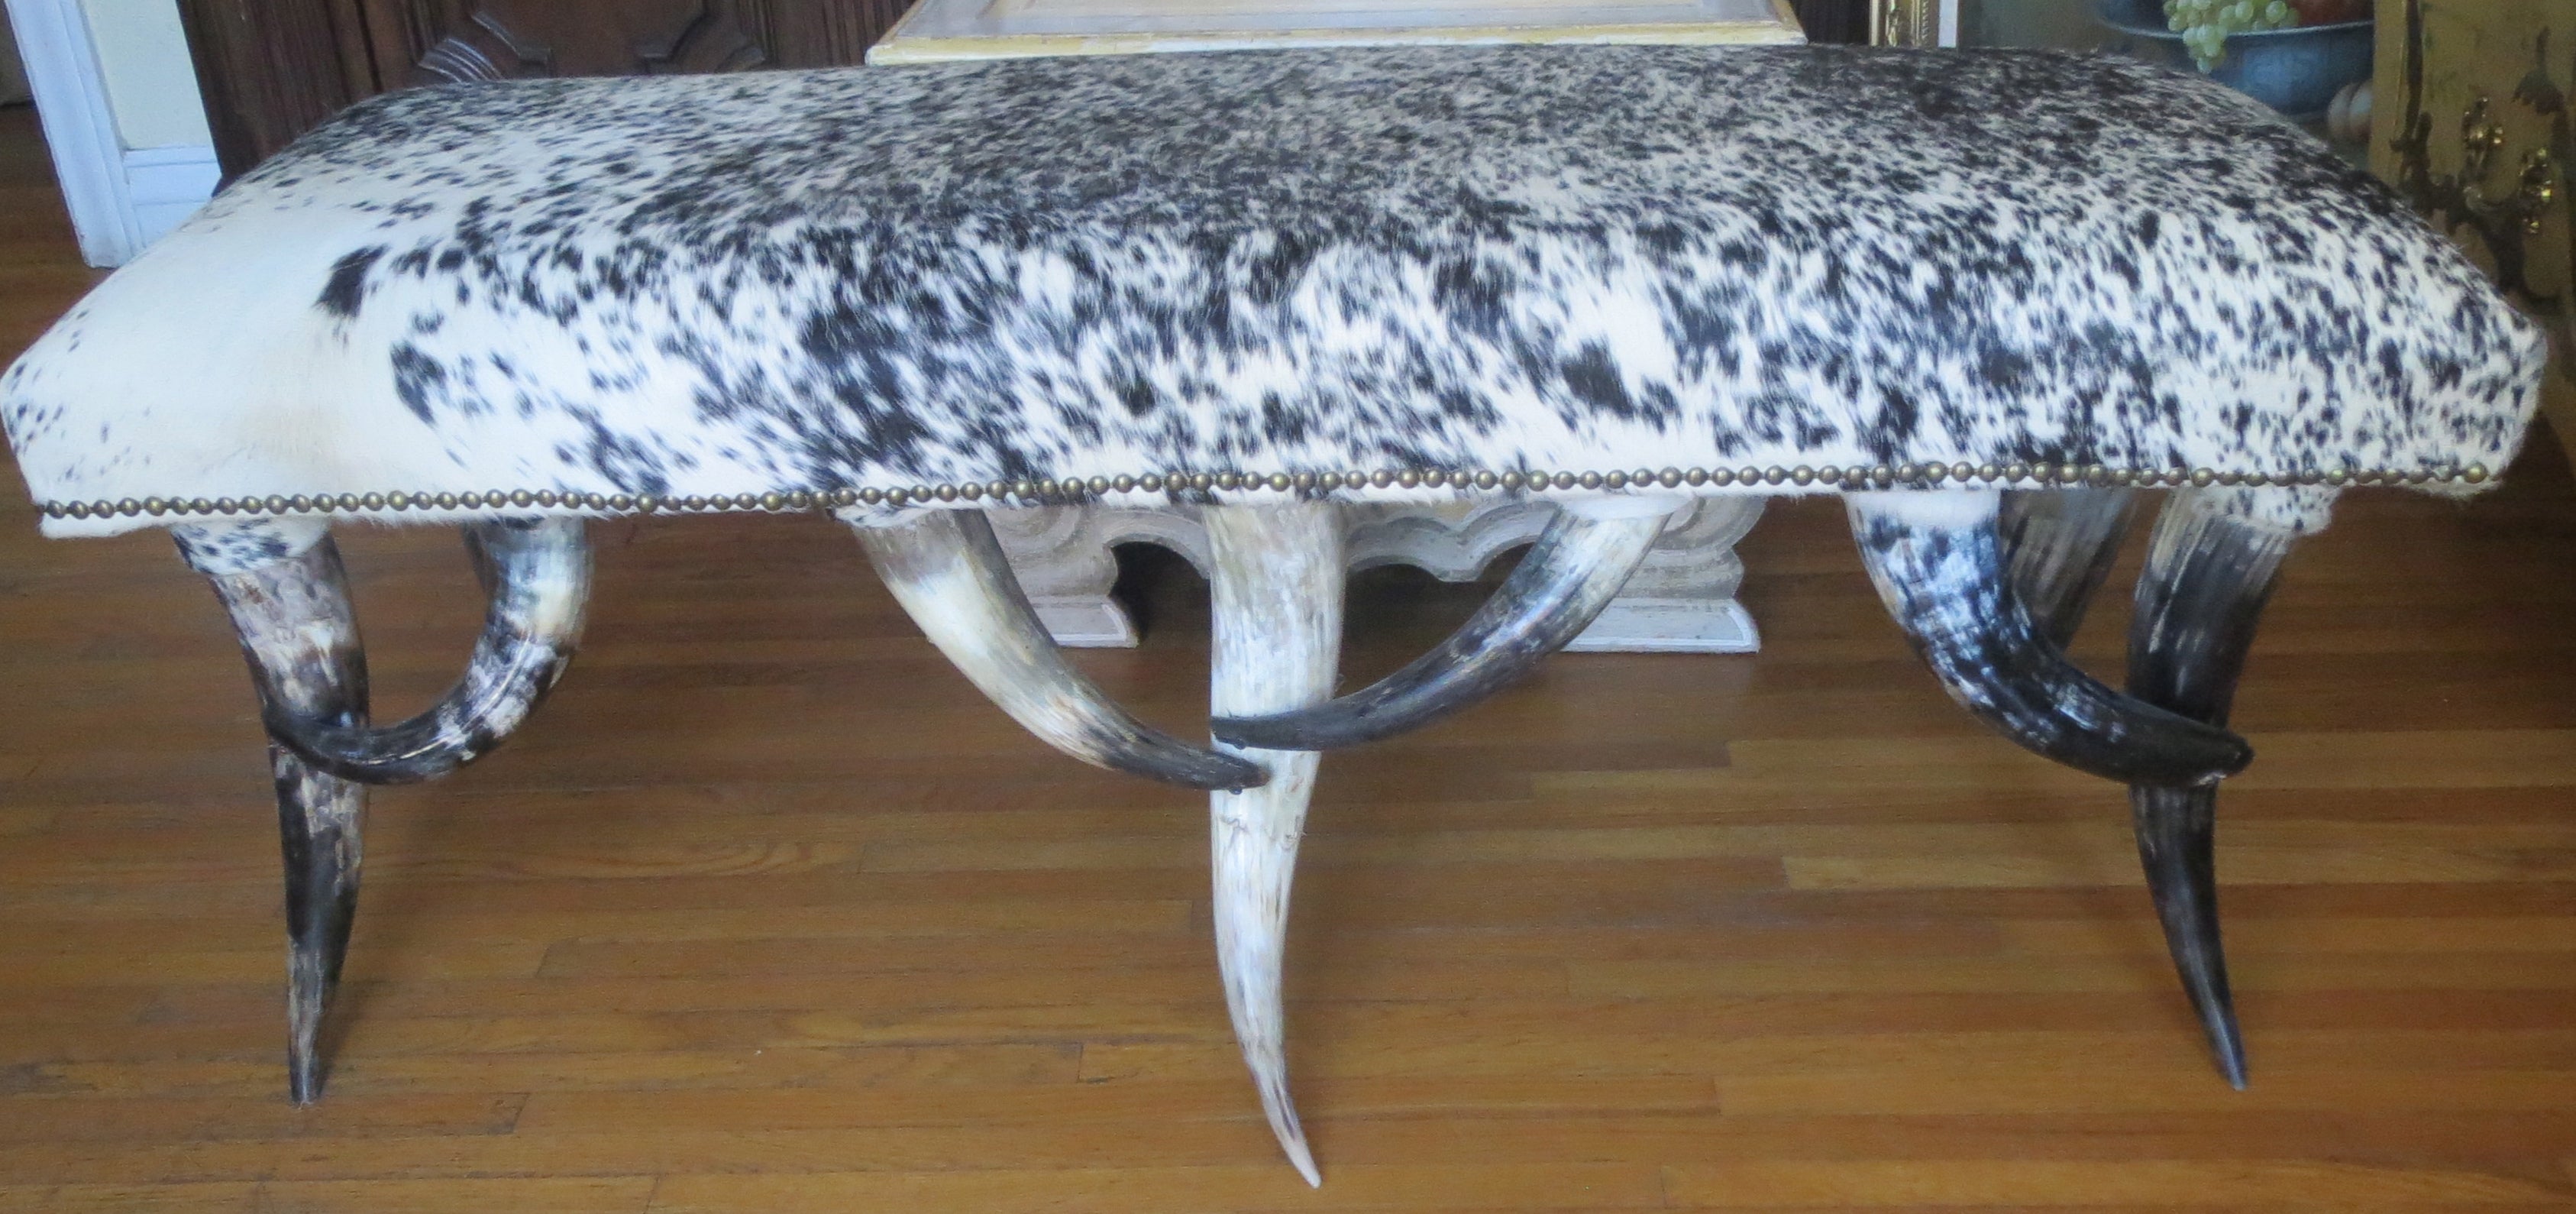 Six Legged Horn Bench w/ Cowhide Upholstery